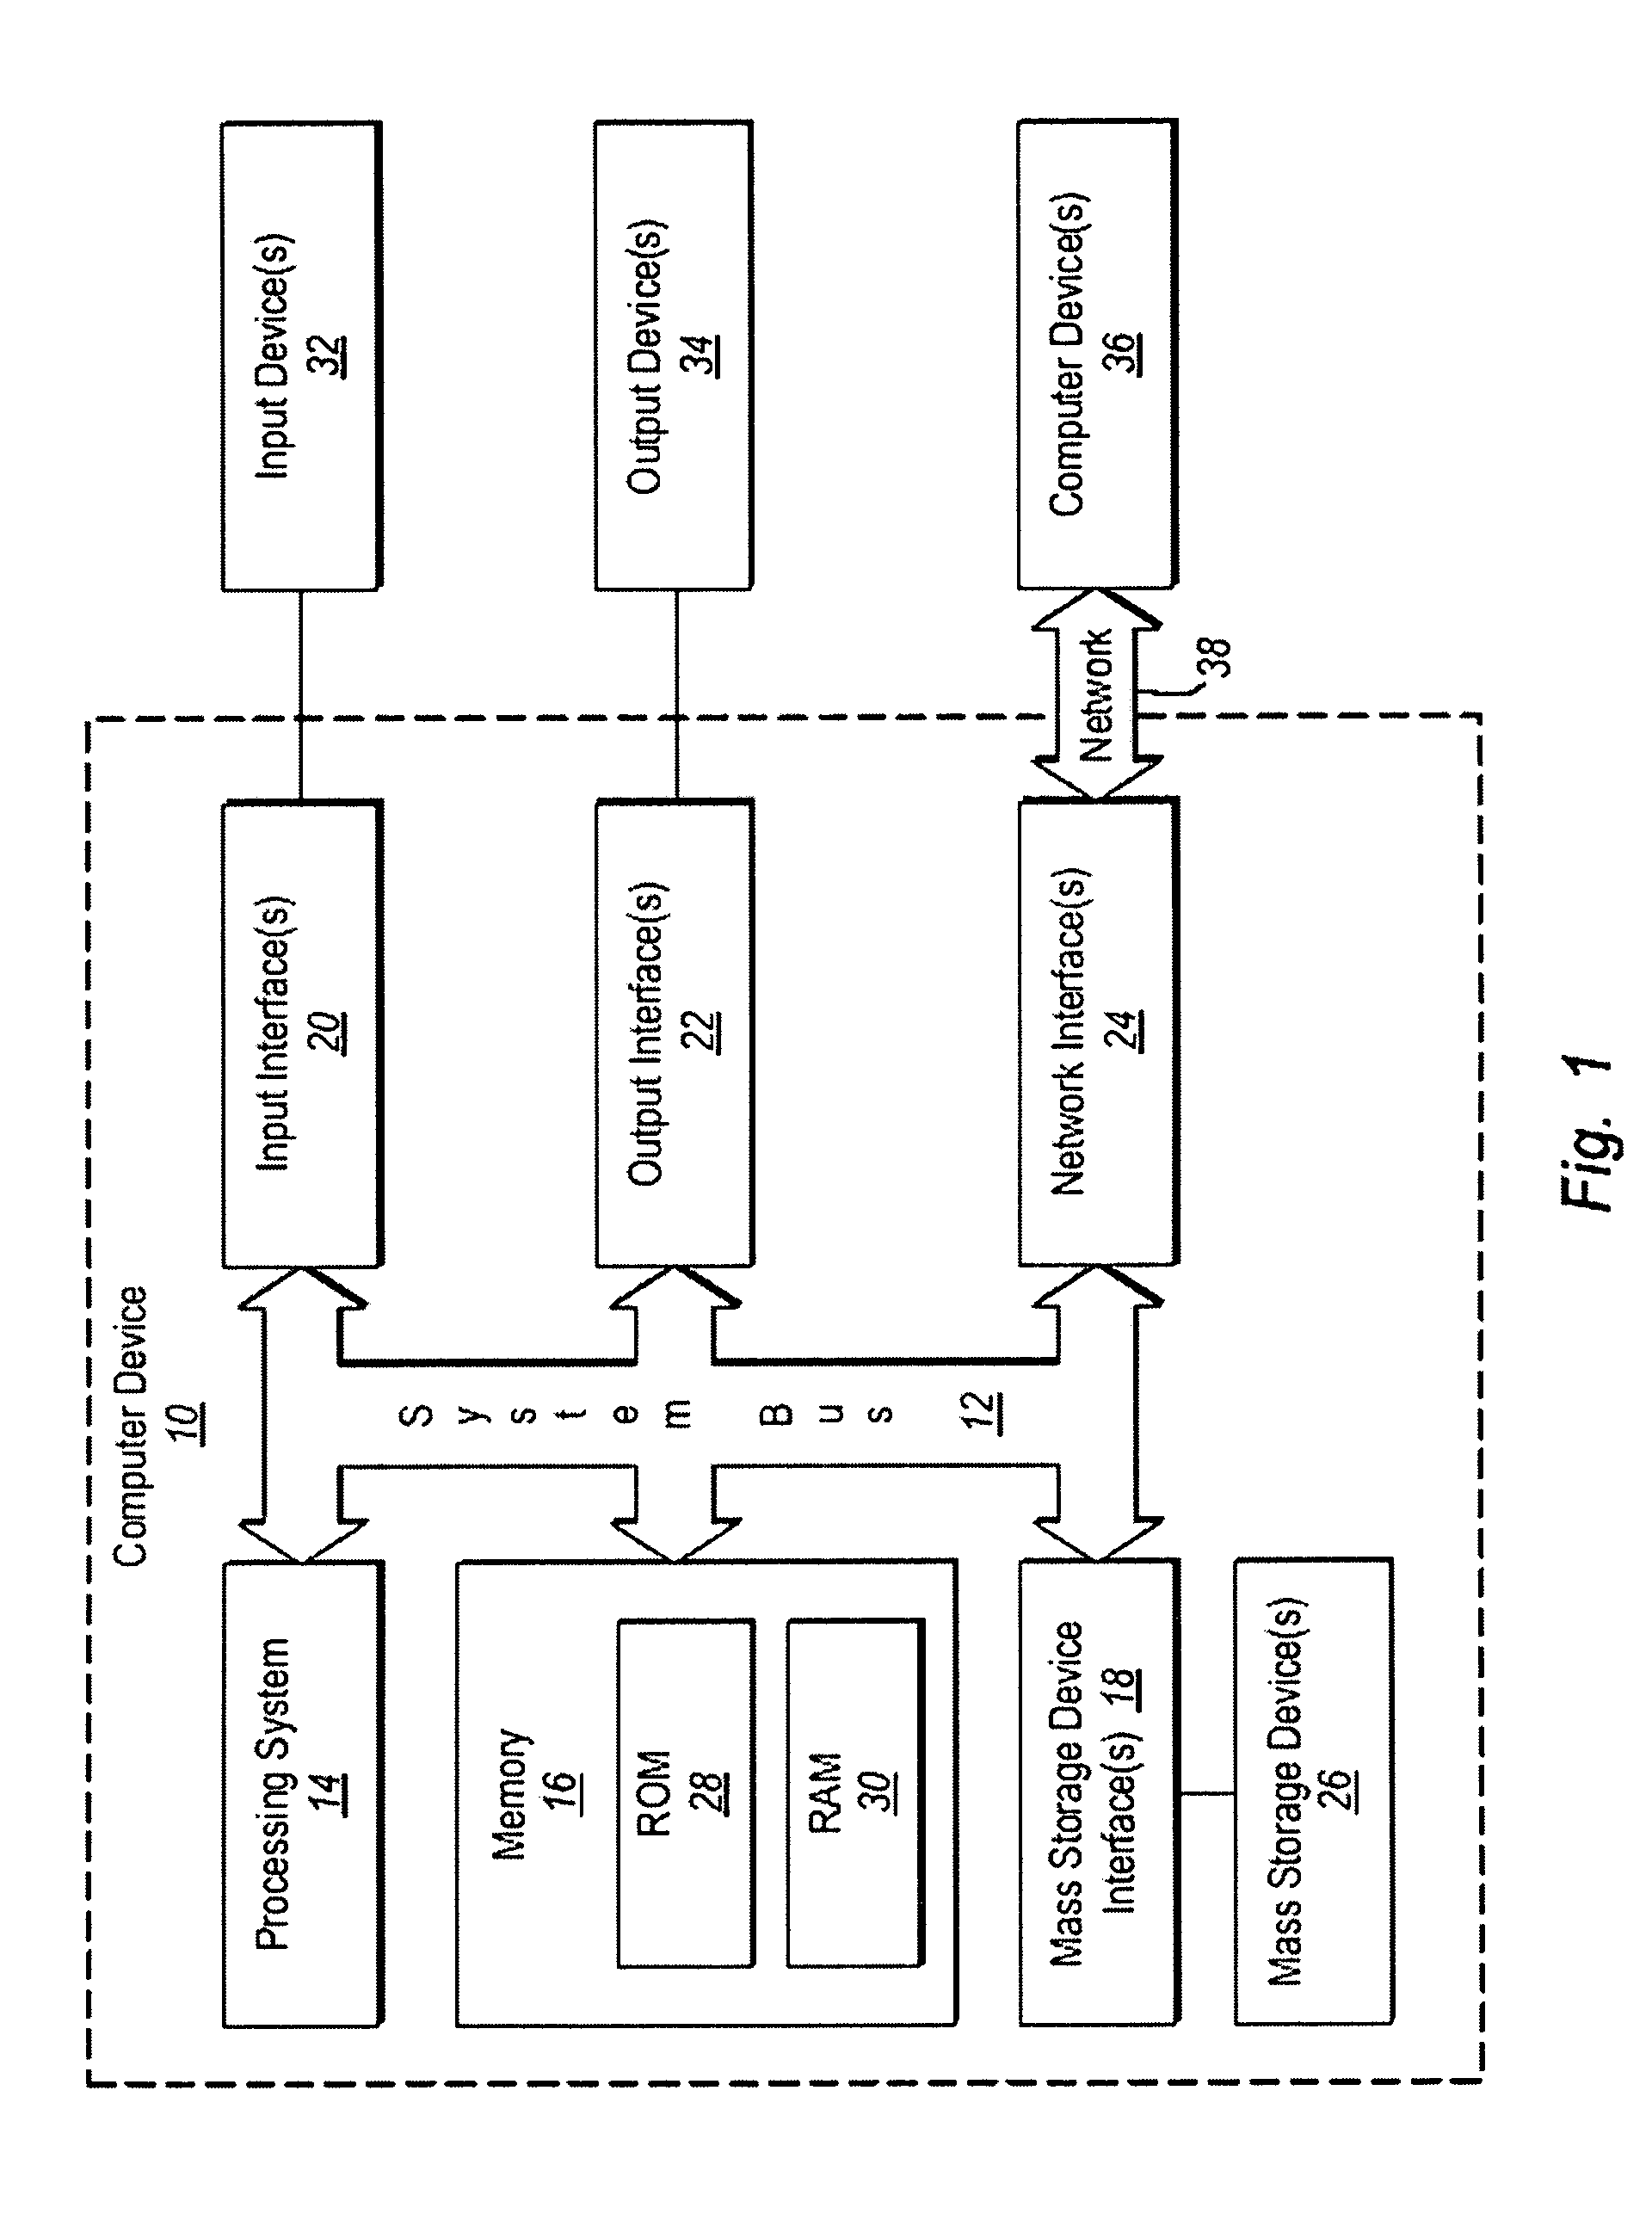 Dynamically integrating disparate systems and providing secure data sharing